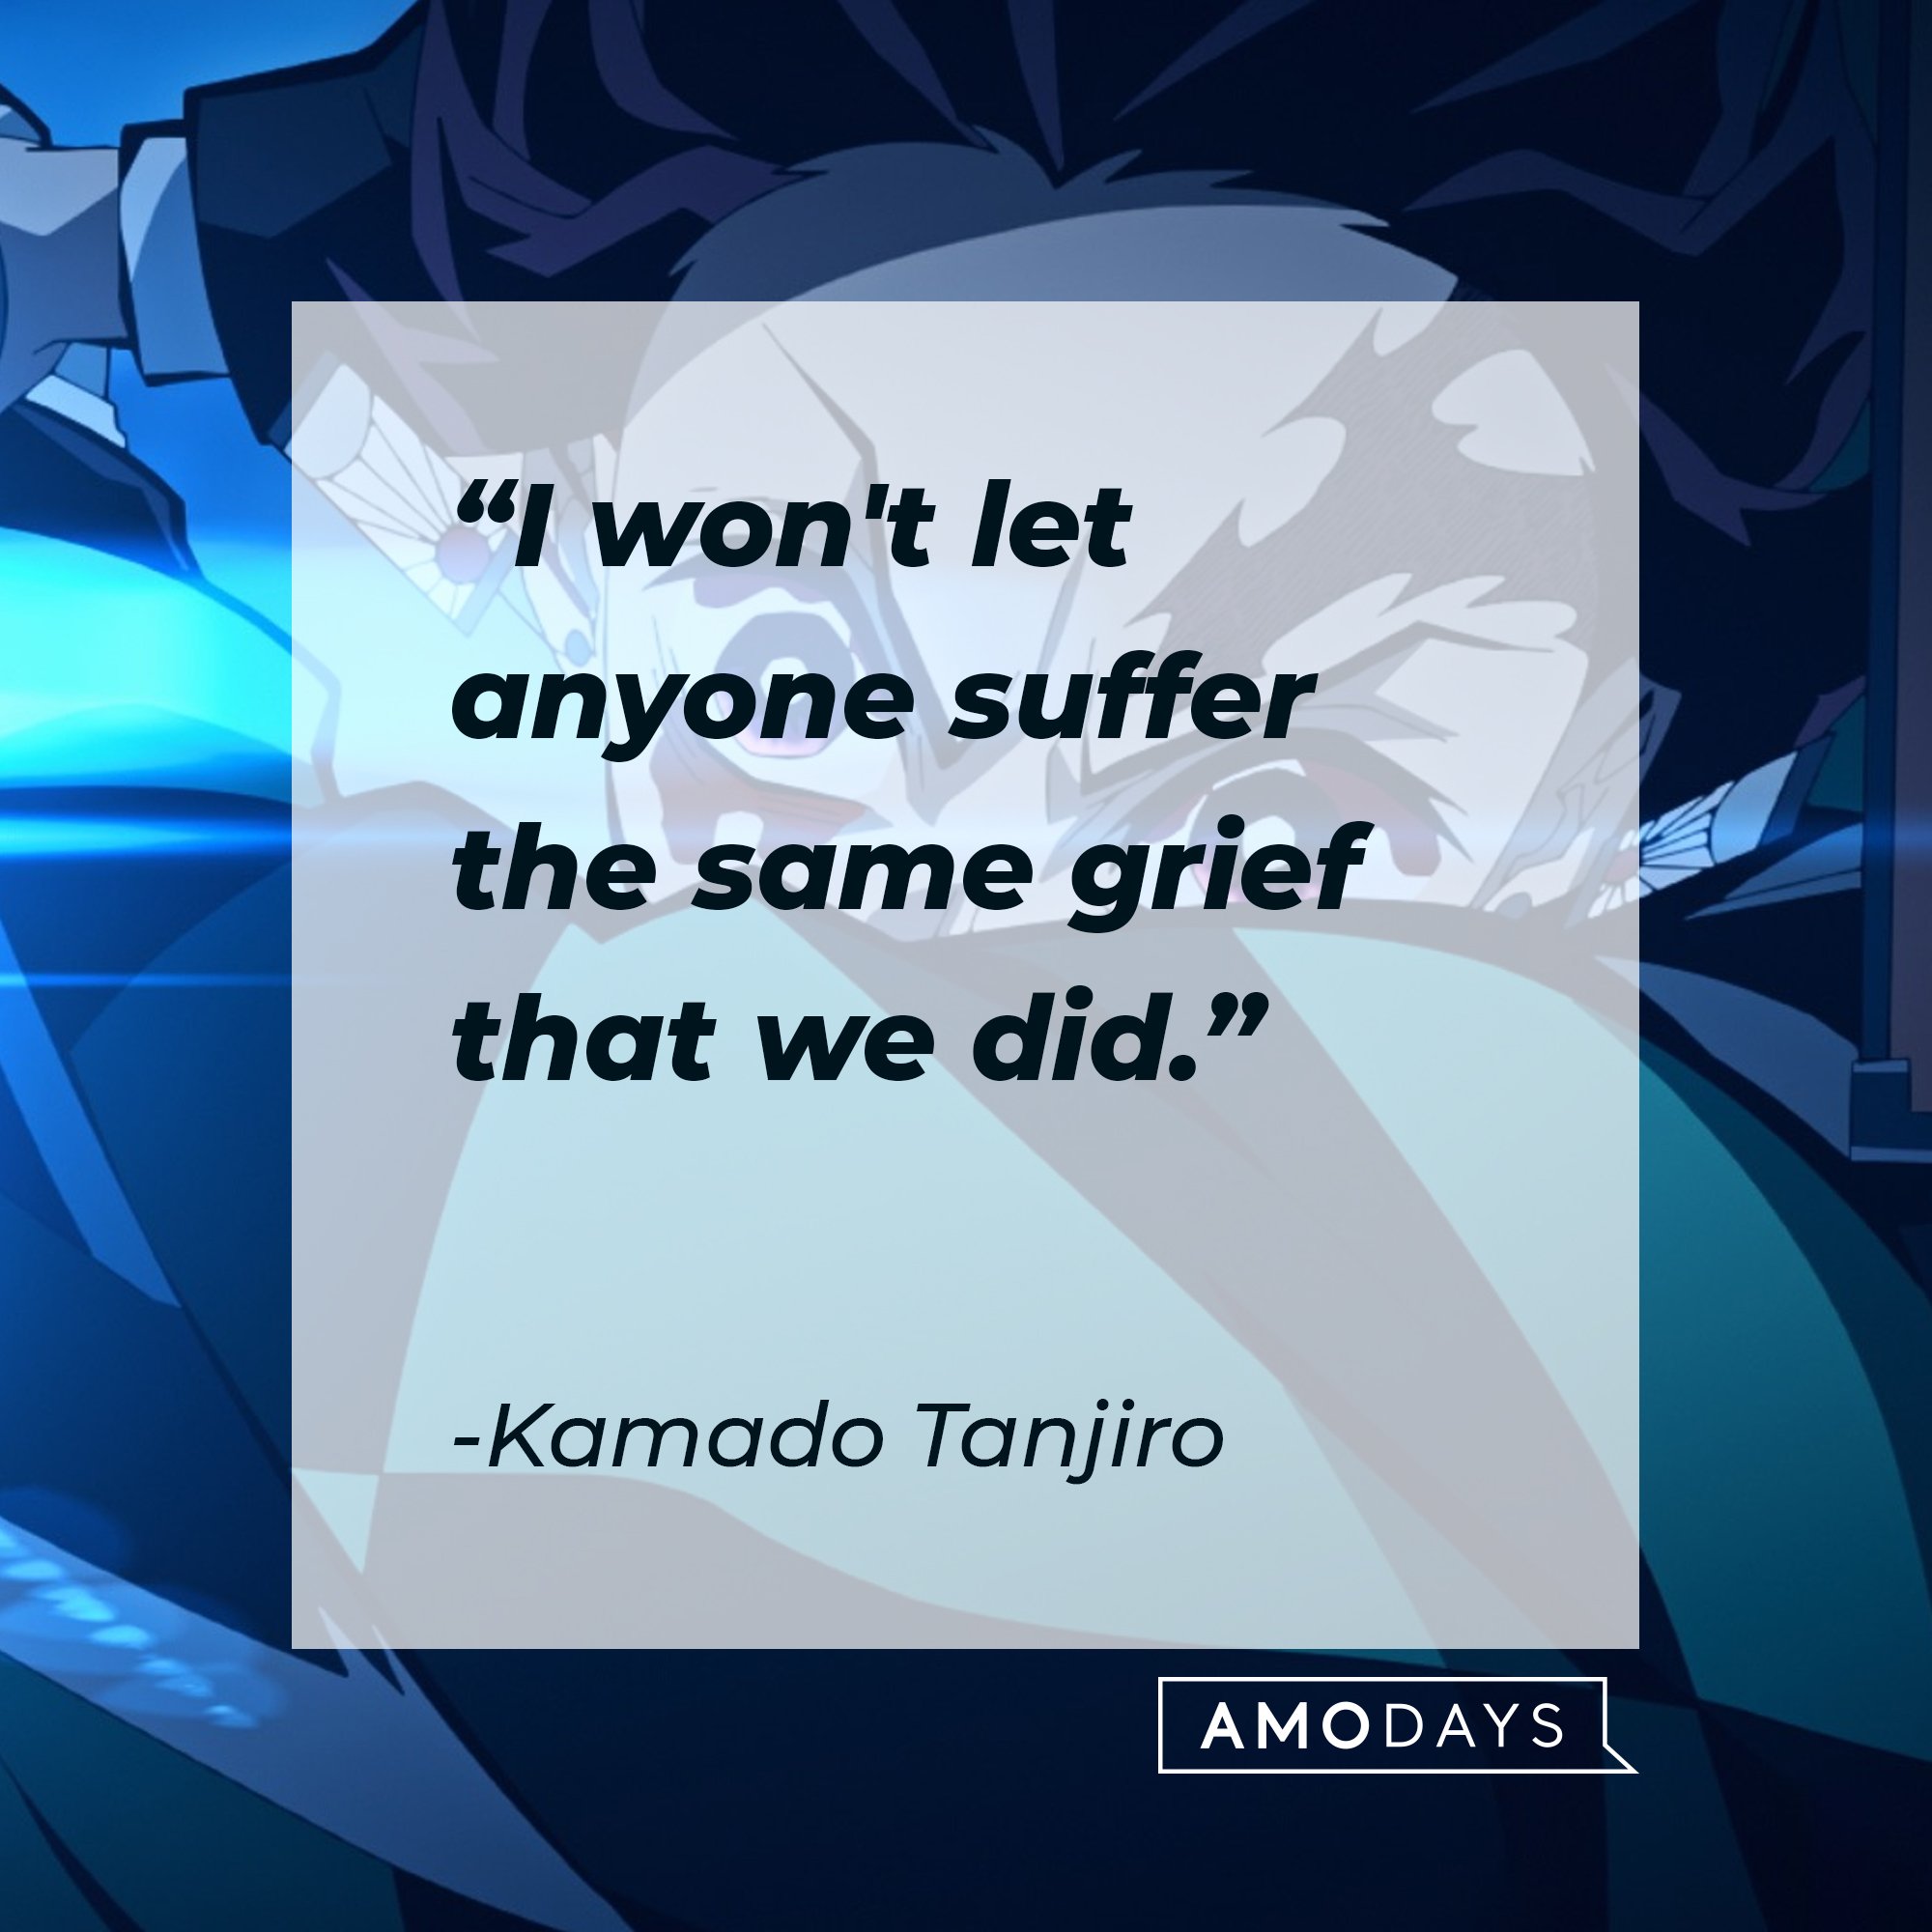 Kamado Tanjiro’s quote: "I won't let anyone suffer the same grief that we did." | Image: AmoDays